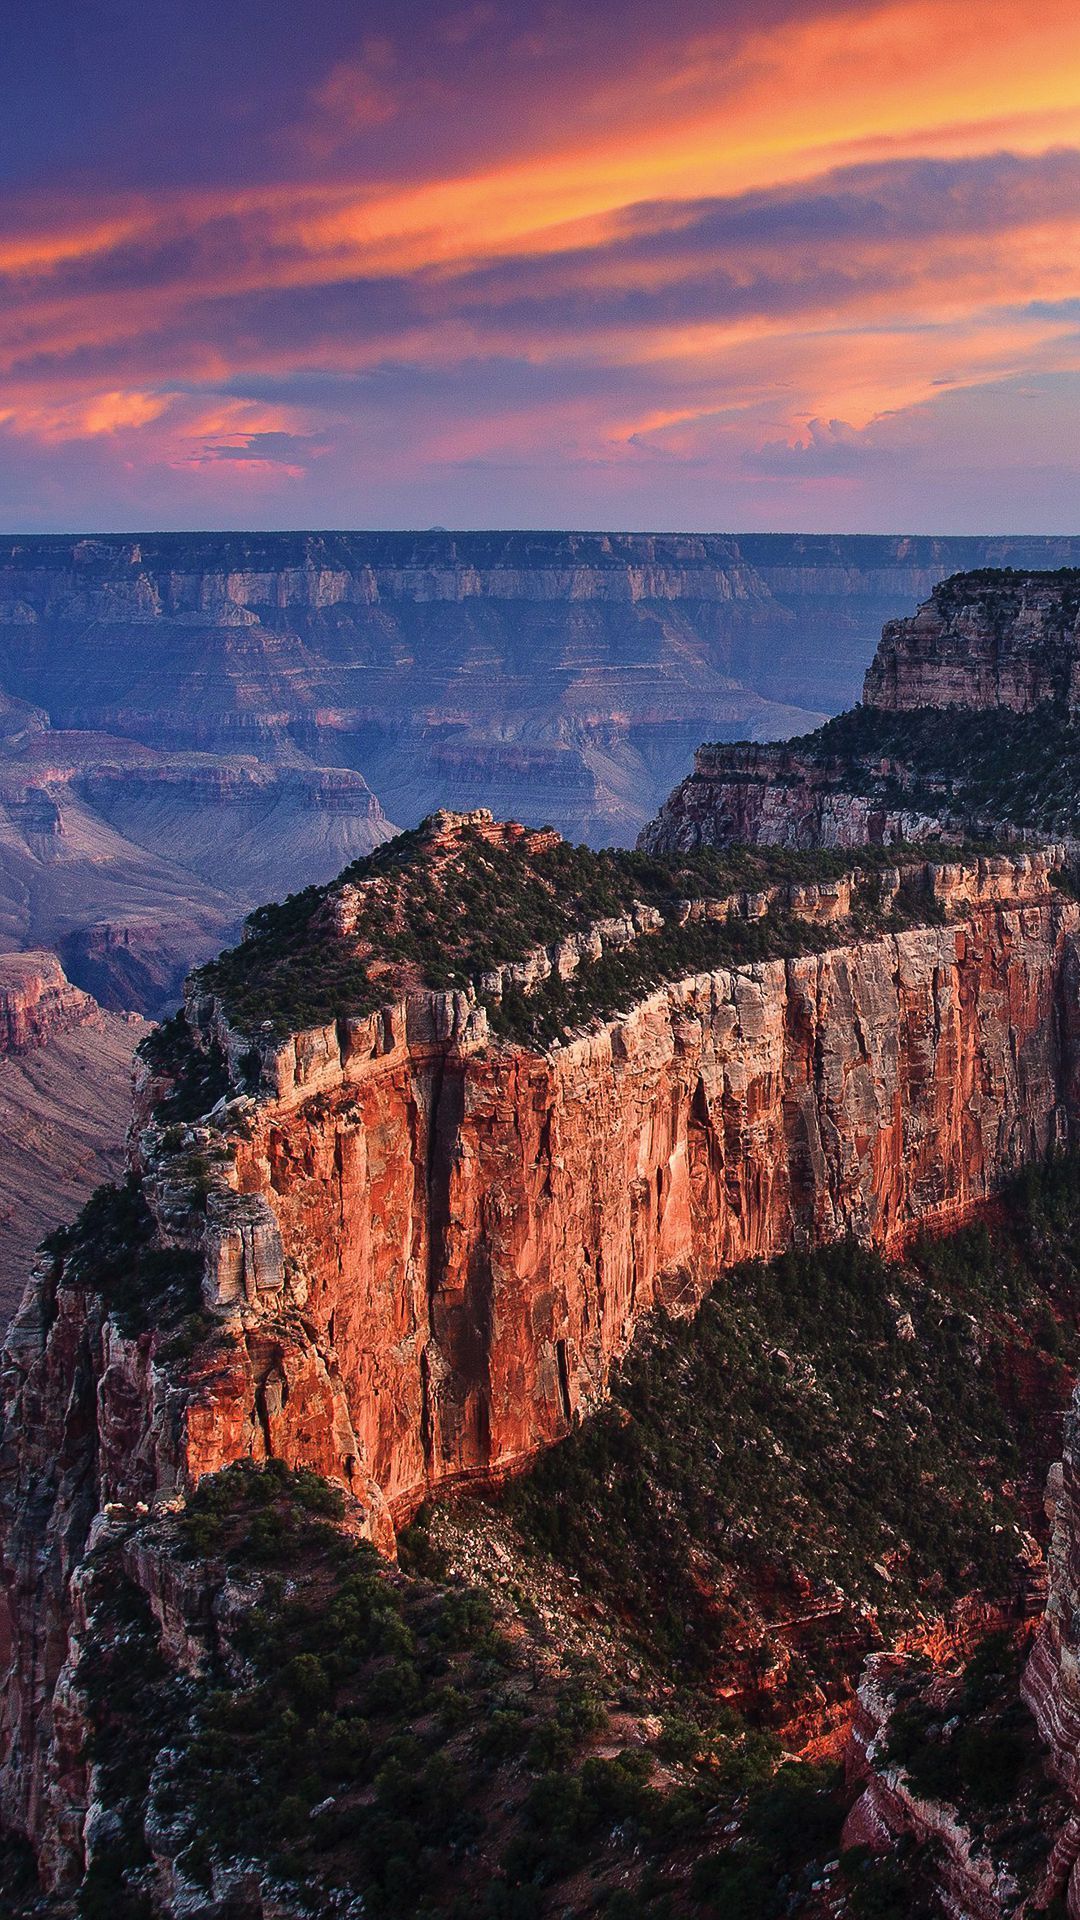 Best National Parks In The USA To Visit. Grand canyon